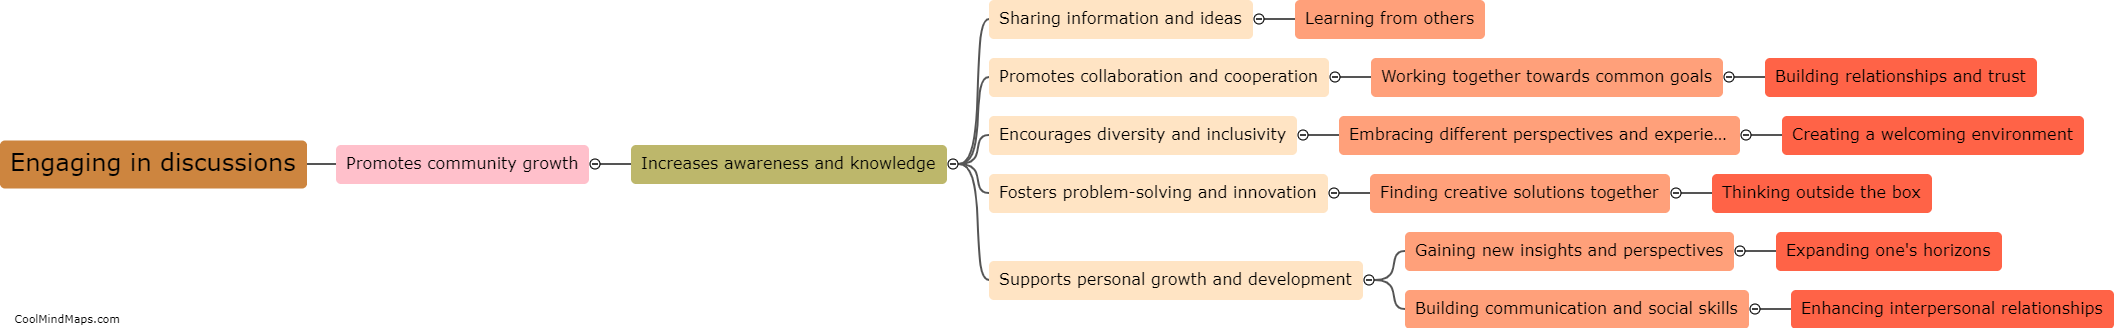 How does engaging in discussions help promote community growth?